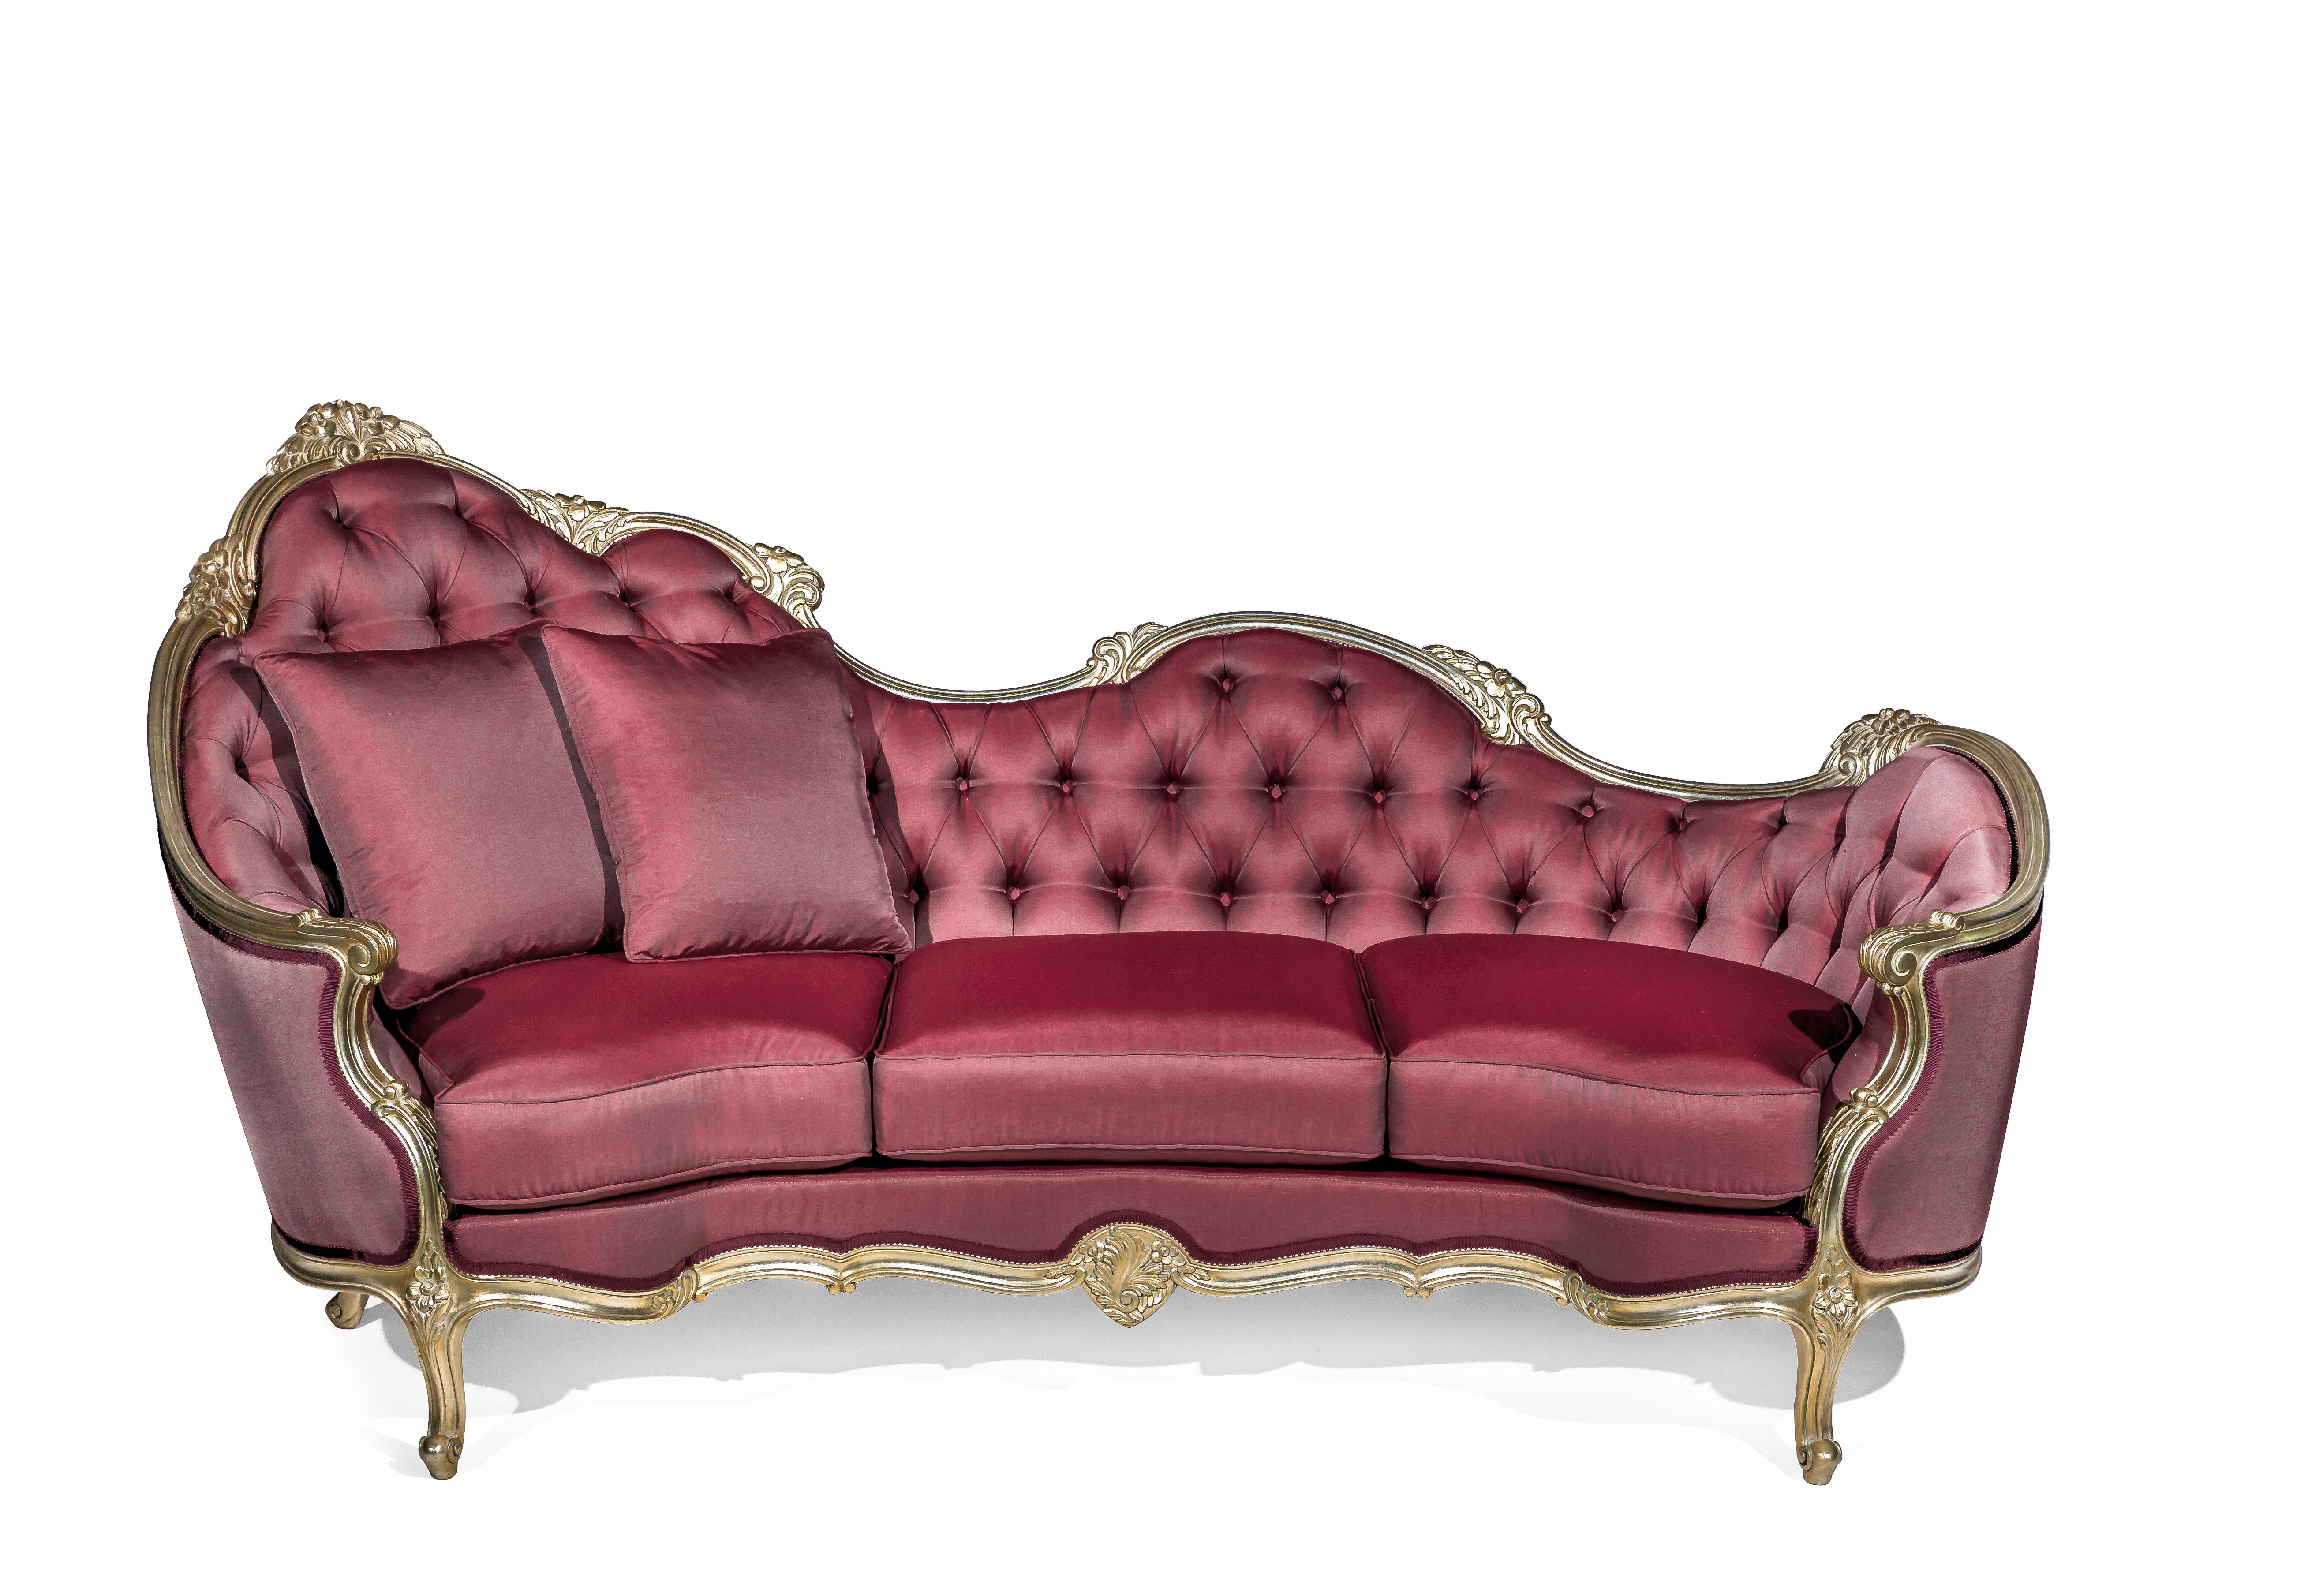 Italian Ls XV Left Settee, Hand Carved and Gold Leaf Decorated, Made in Italy For Sale